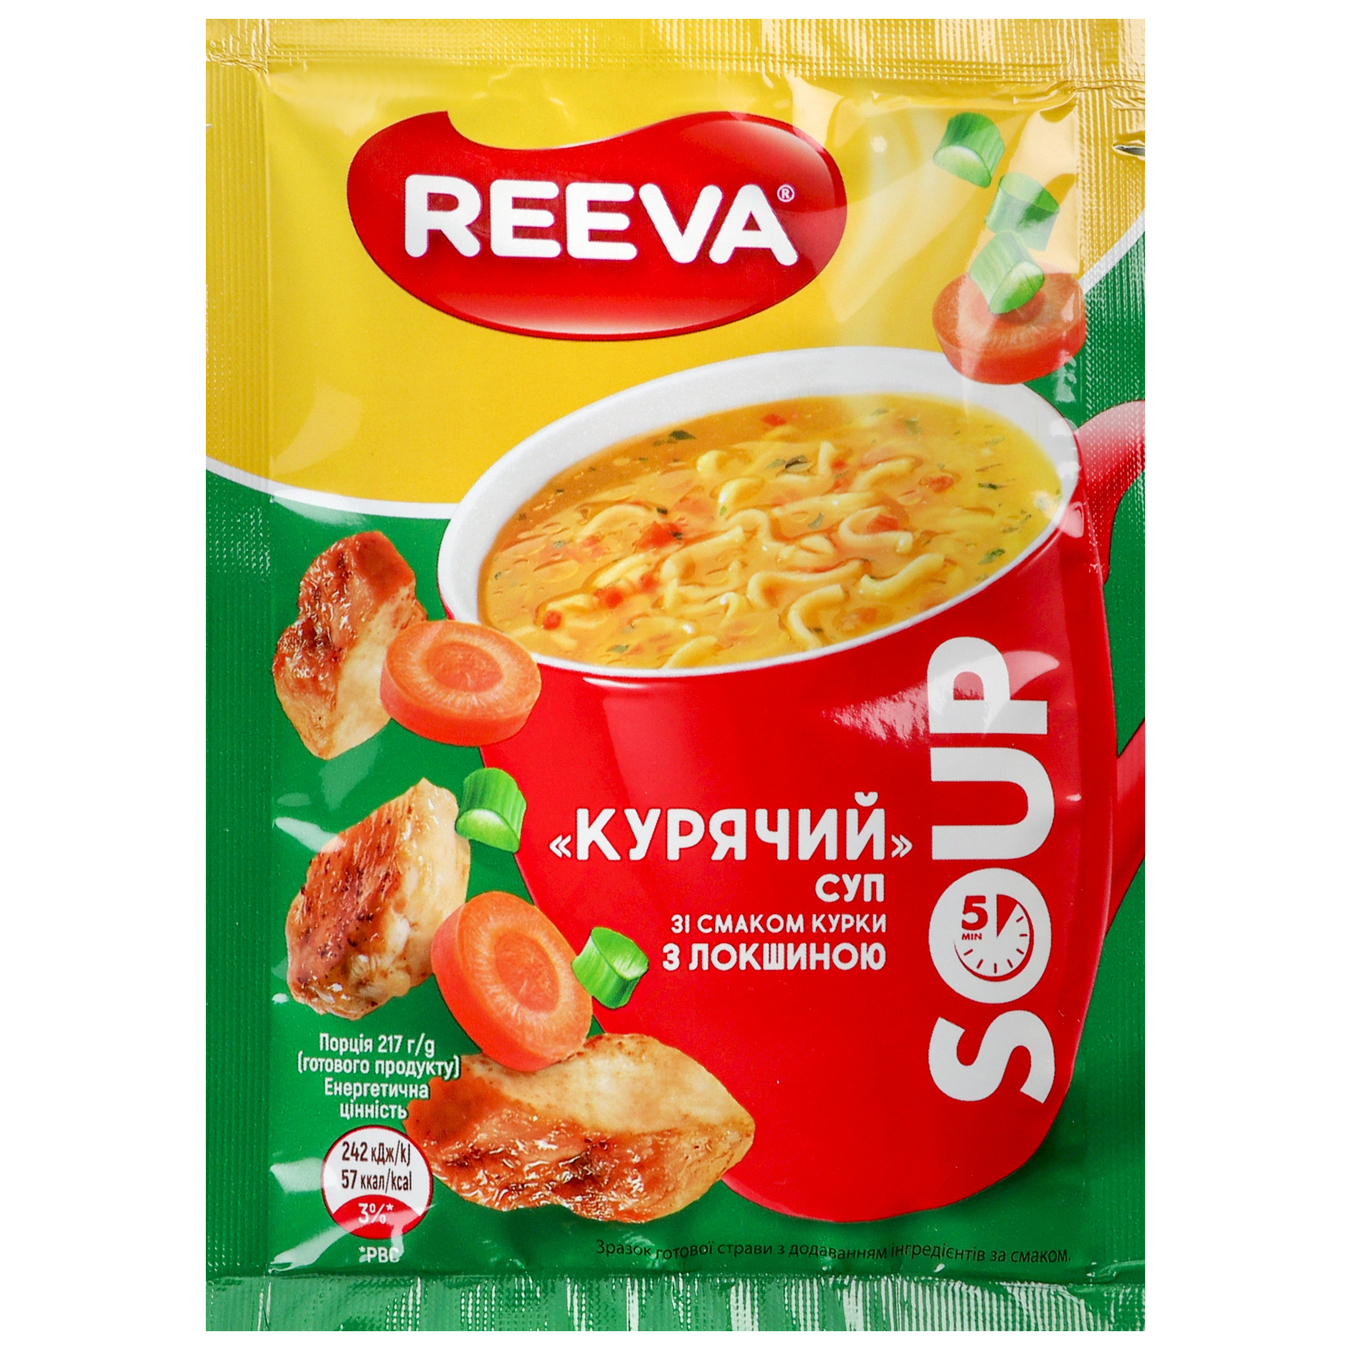 Reeva noodle soup with chicken flavor 17g